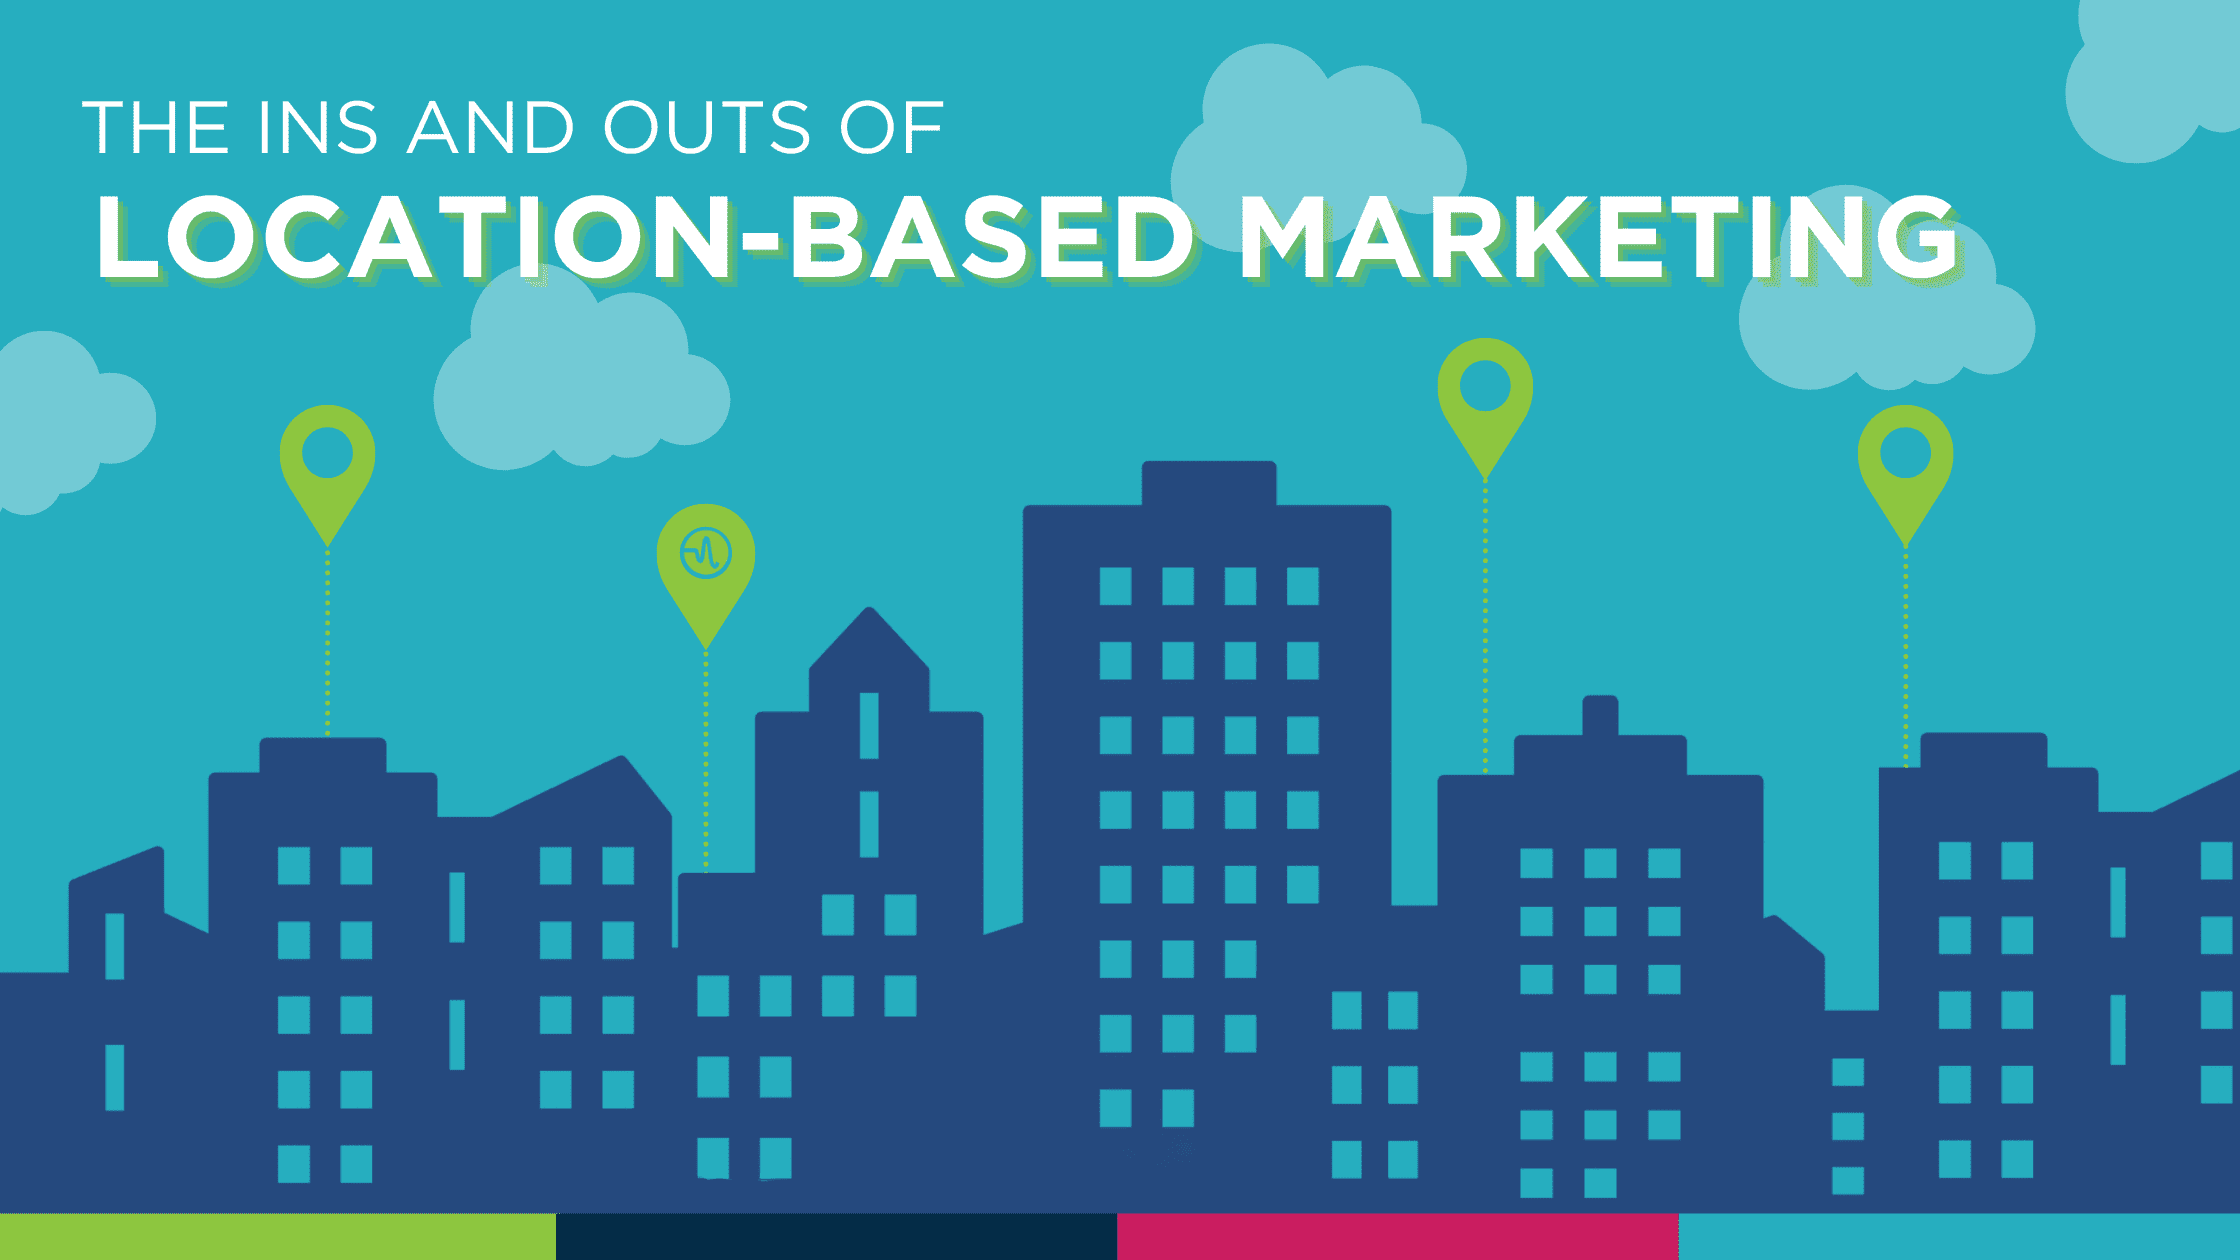 The Ins and Outs of Location-Based Marketing